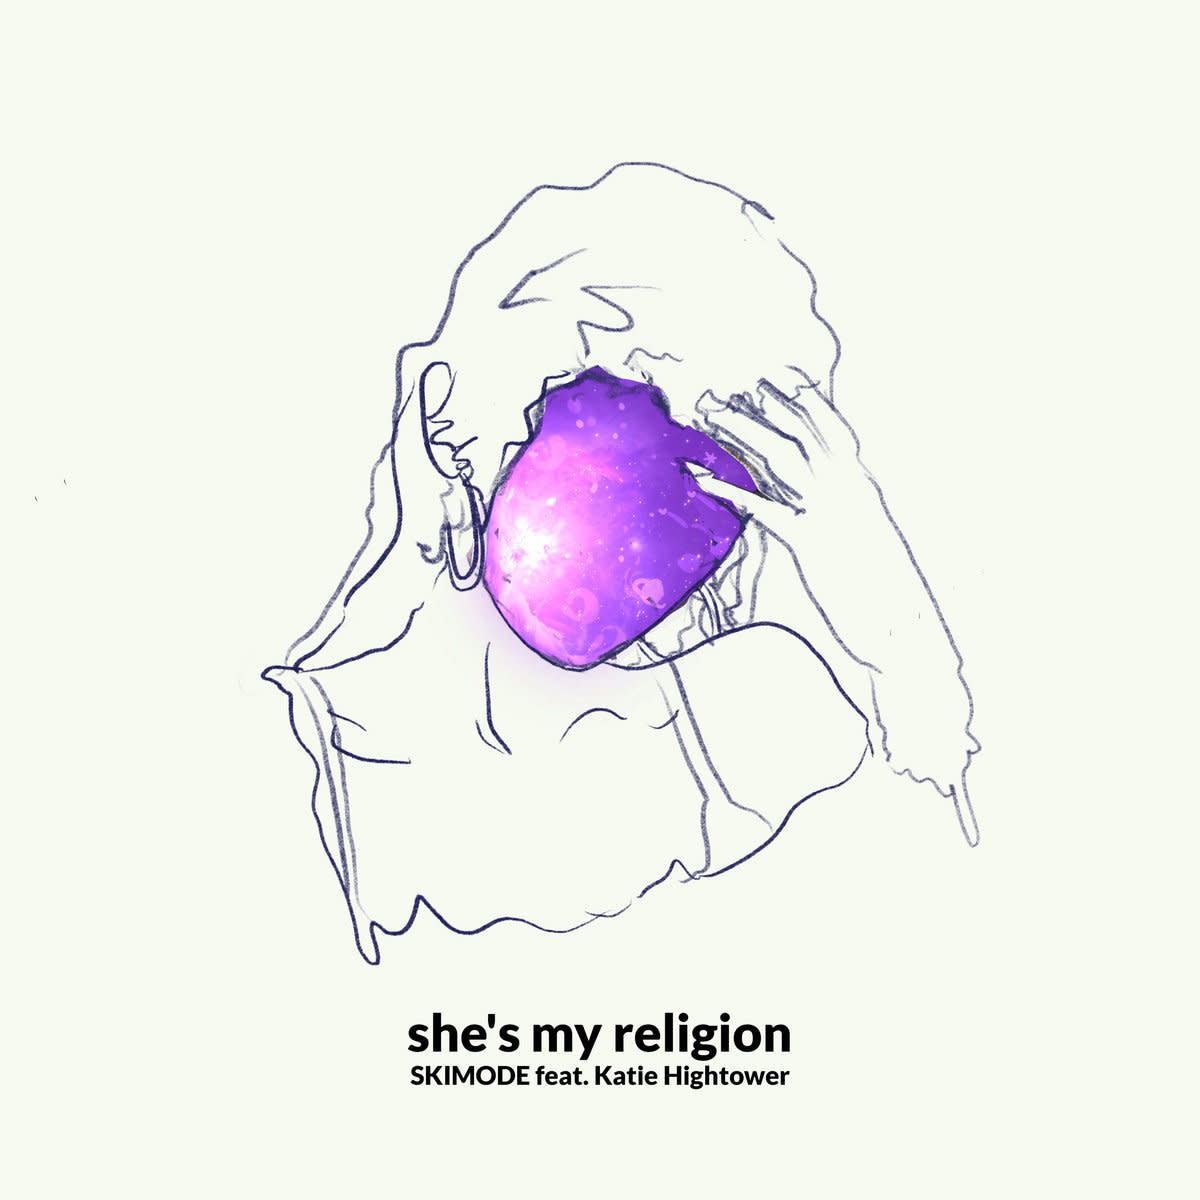 synth-single-review-shes-my-religion-covered-by-skimode-feat-katie-hightower